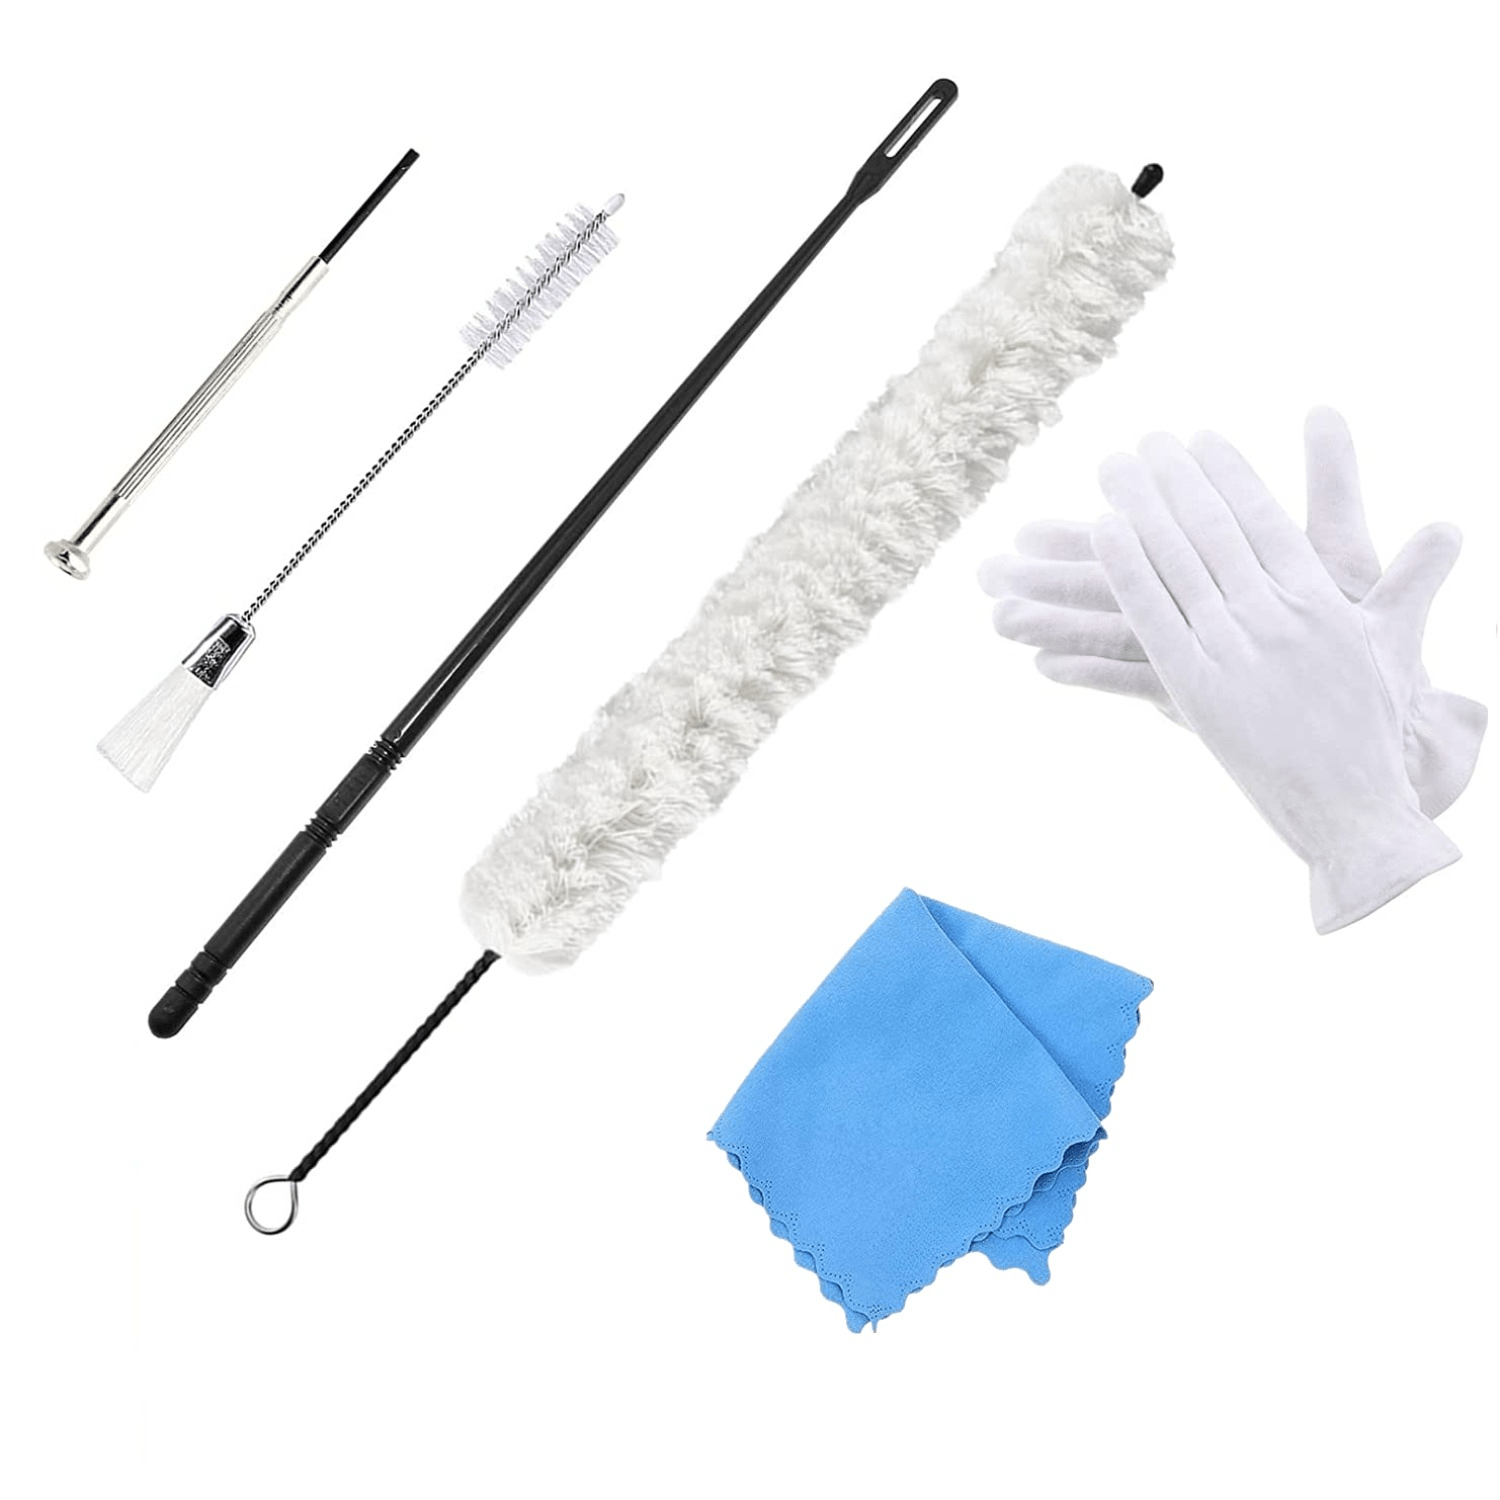 Plastic Cleaning Rod, Cleaning Rods Flutes